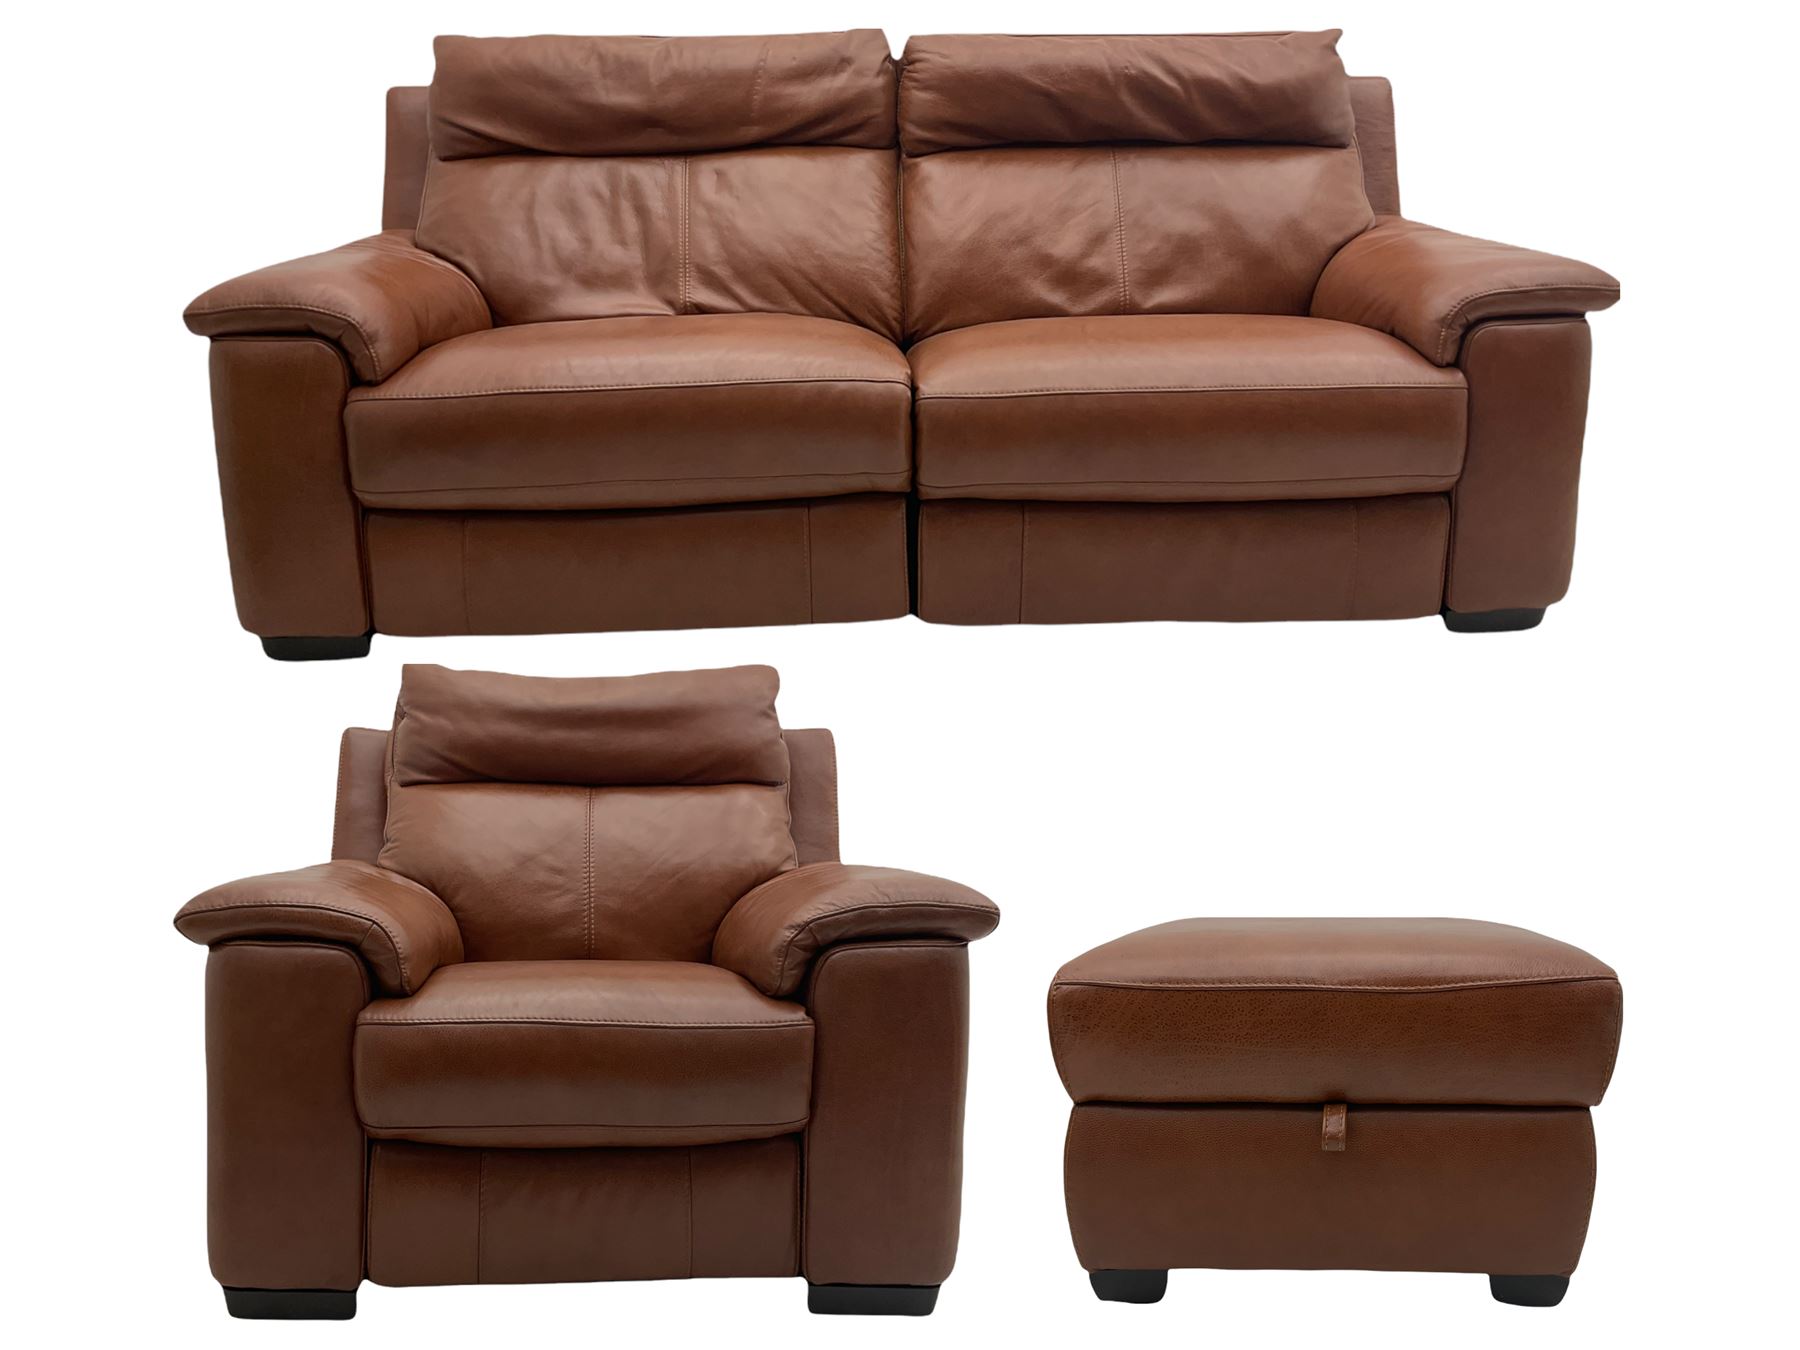 Three electric reclining sofa upholstered in tan leather